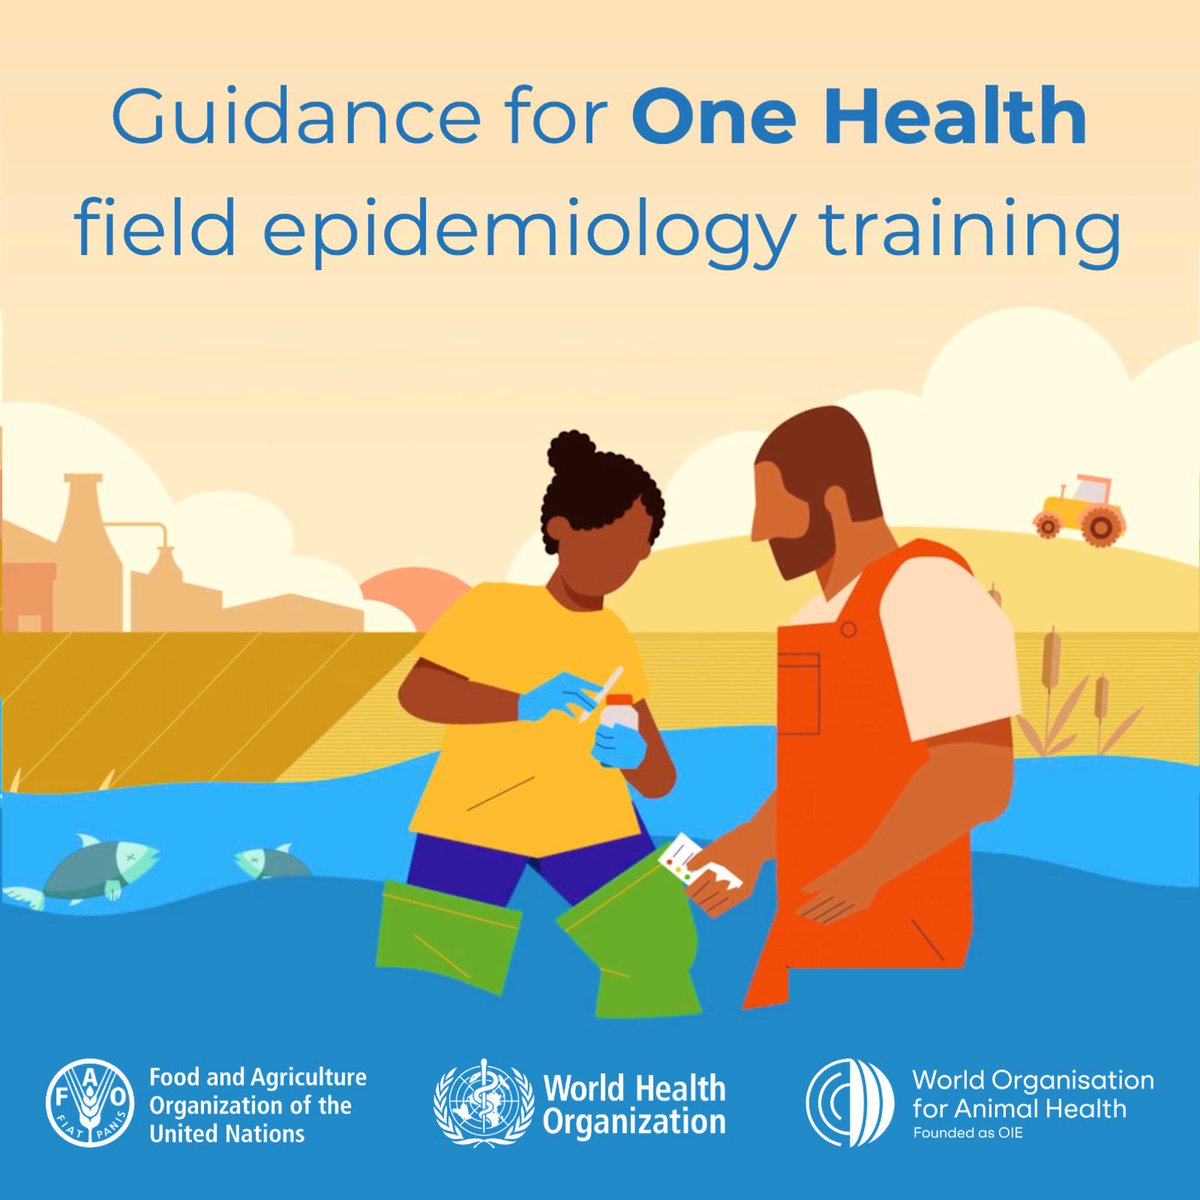 Over 60% of emerging infectious diseases are of animal origin.

For @FAO field epidemiology training programmes are crucial for preparing the health workforce to prevent, detect and contain infectious diseases.

👉🏾 rb.gy/2adtwk

#OneHealth